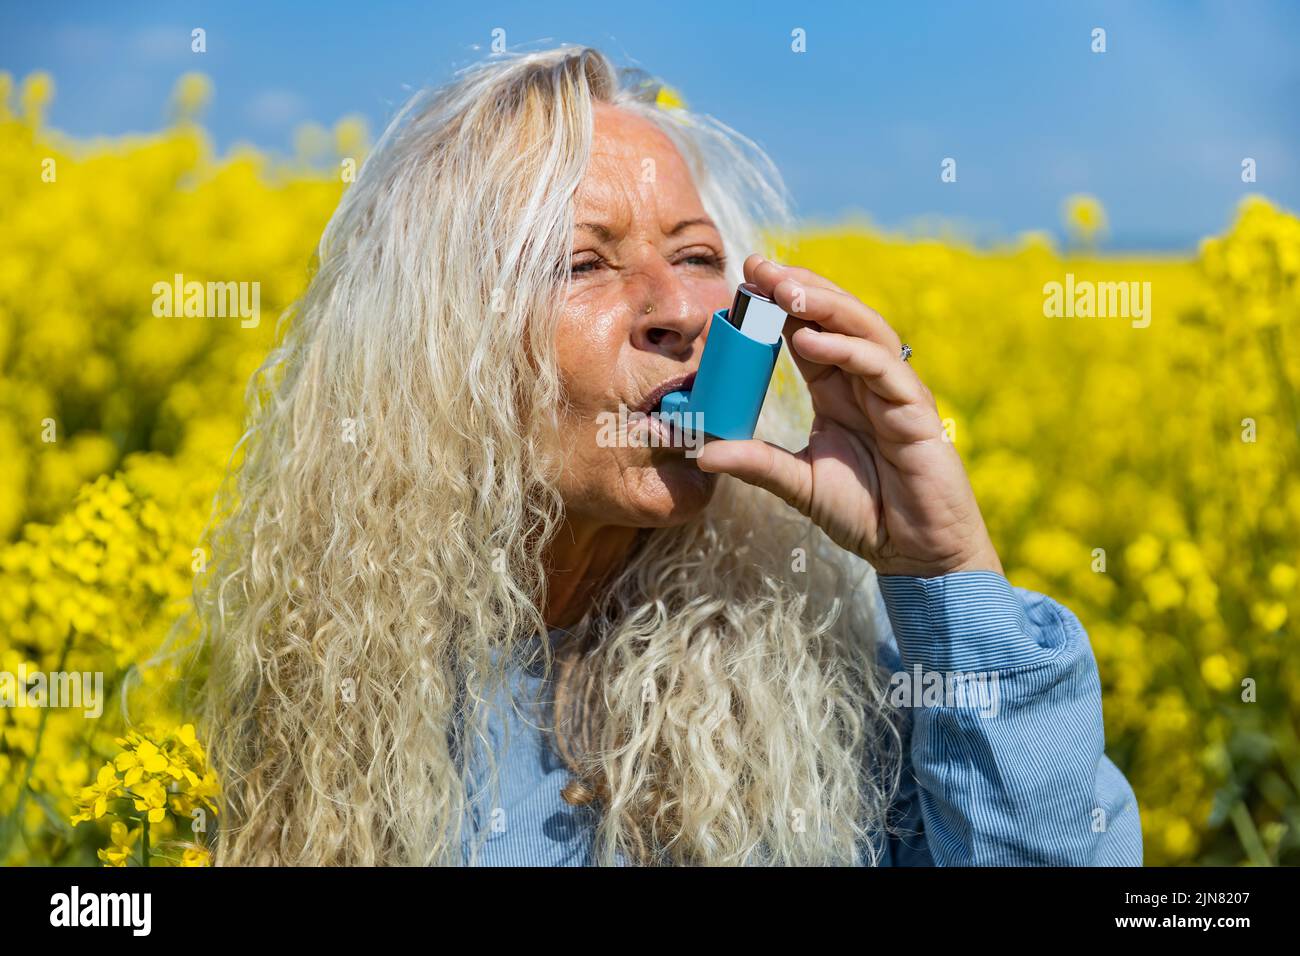 Elderly woman using an asthma metered dose inhaler in a blooming canola field Stock Photo